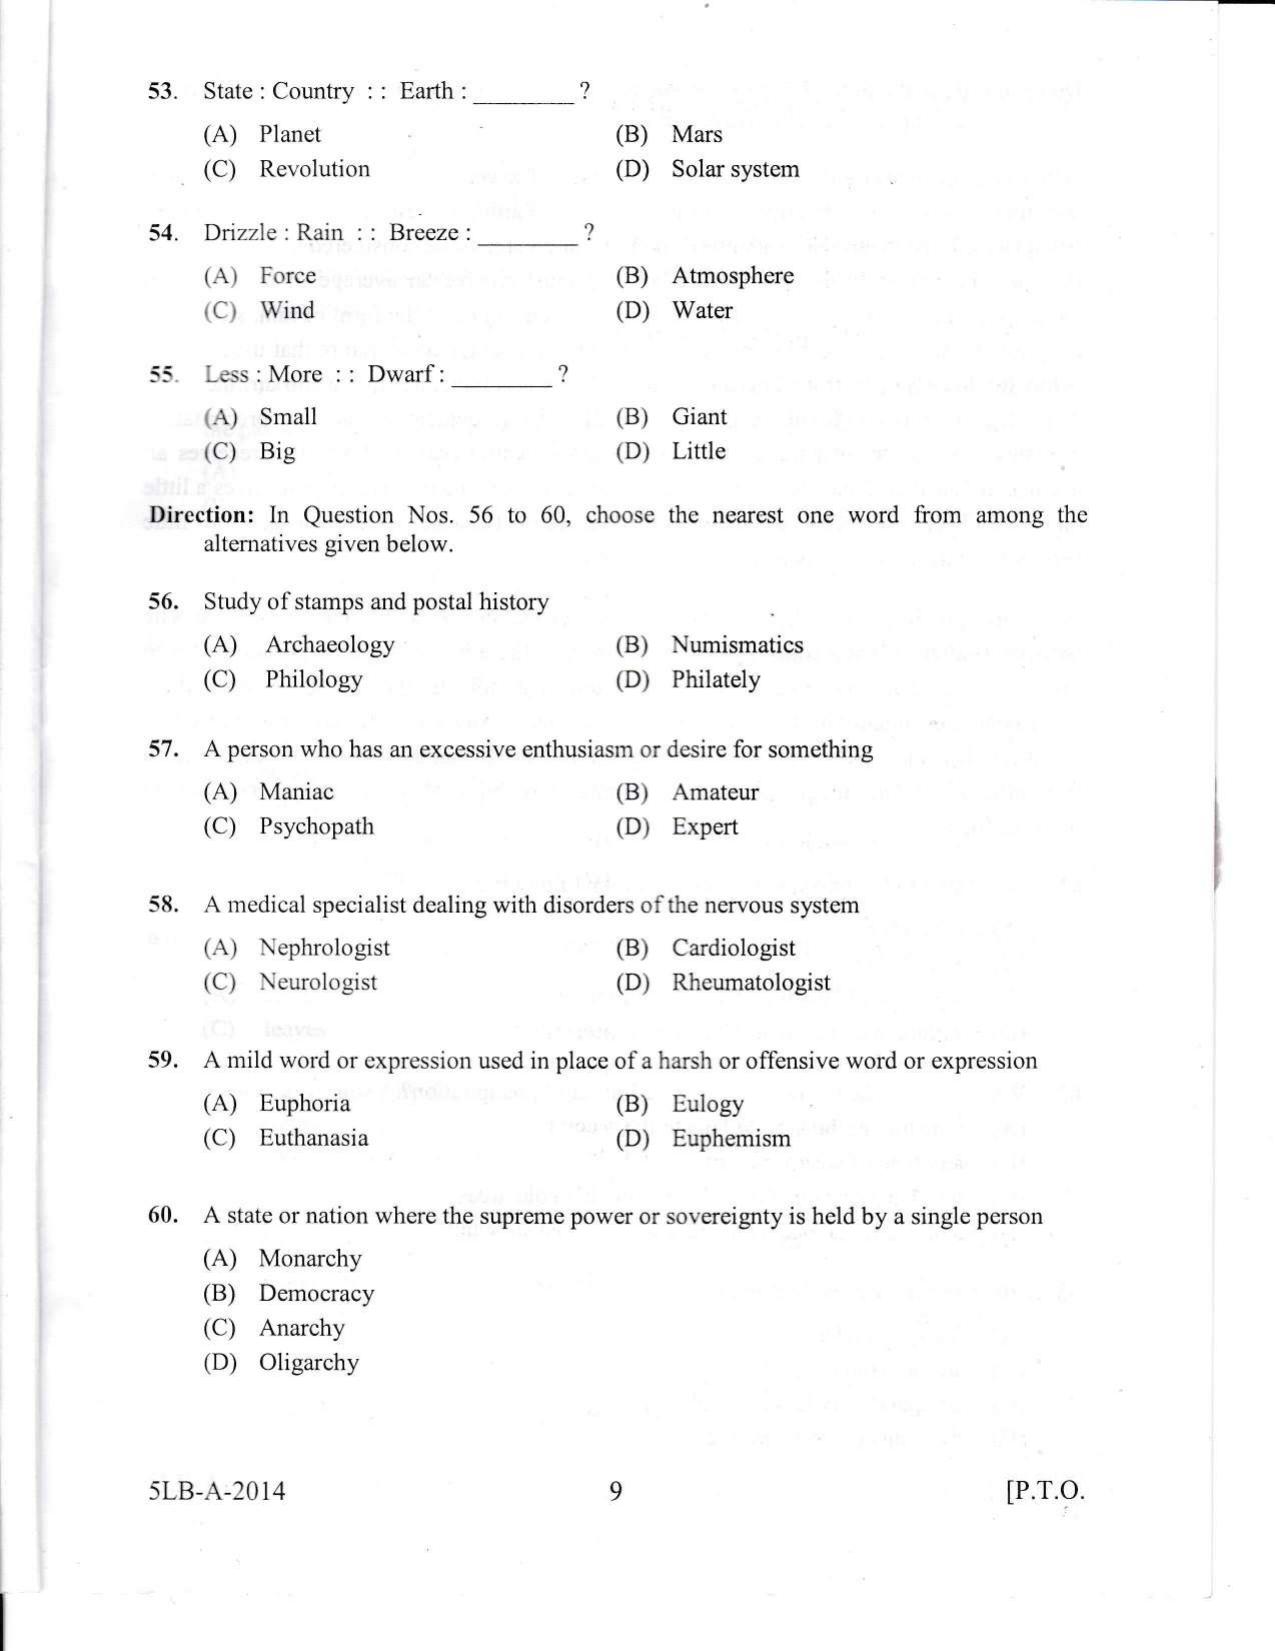 KLEE 5 Year LLB Exam 2014 Question Paper - Page 9